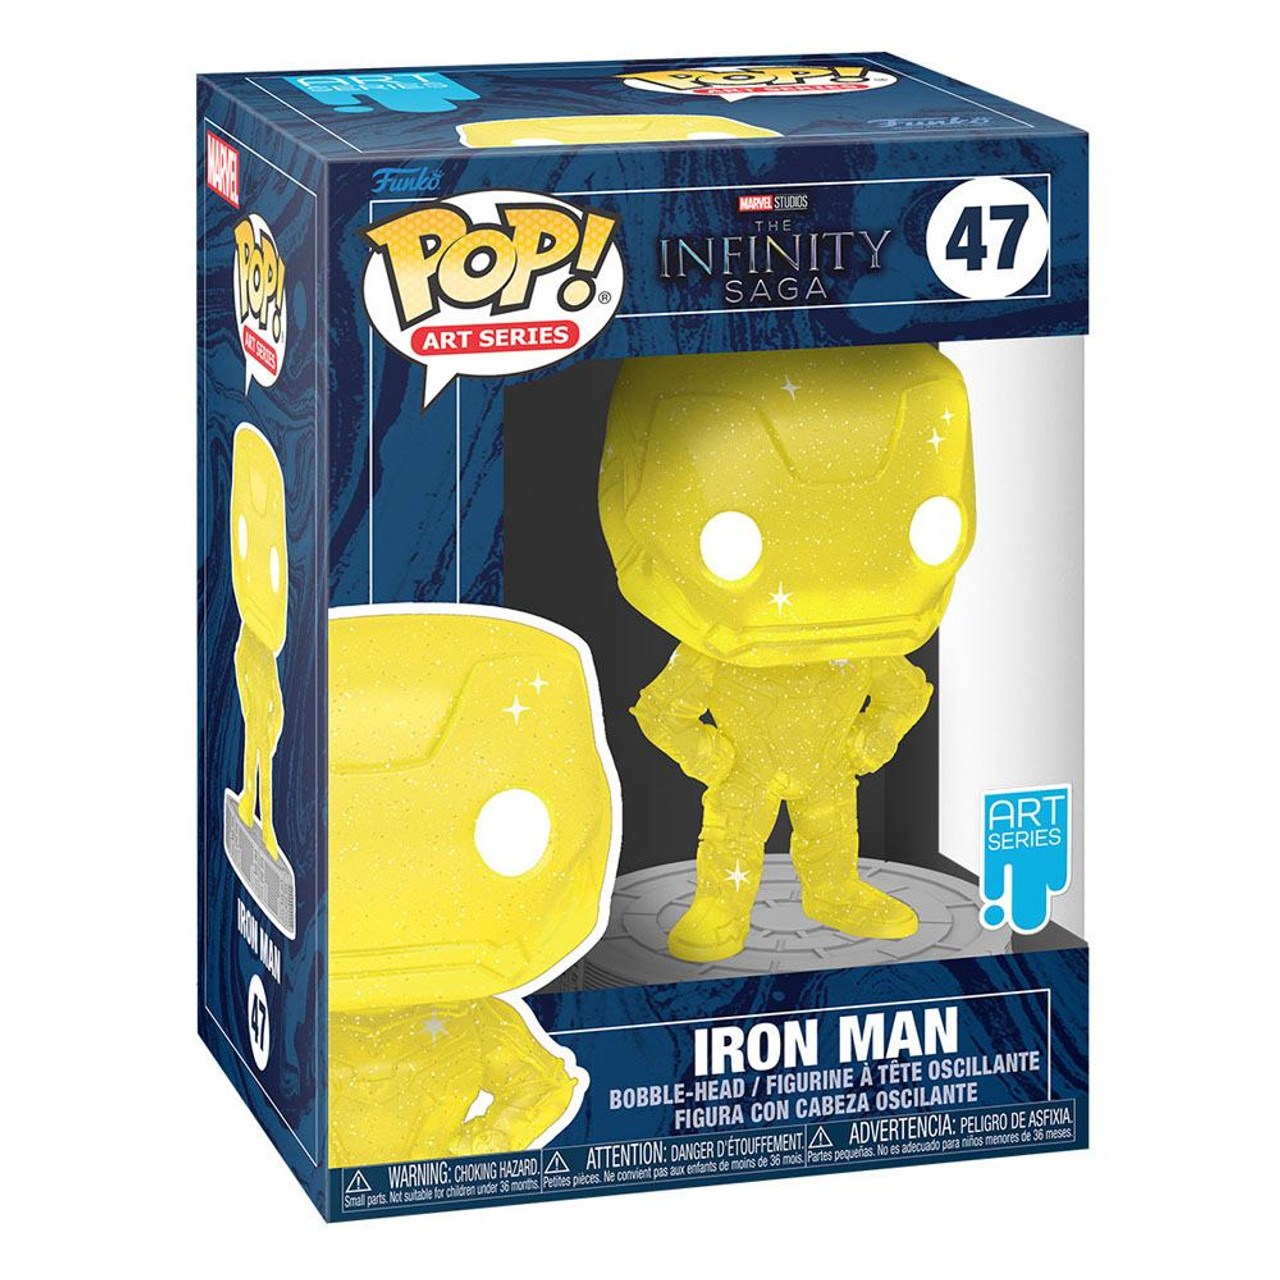 Buy Pop! Iron Man with Pin at Funko.